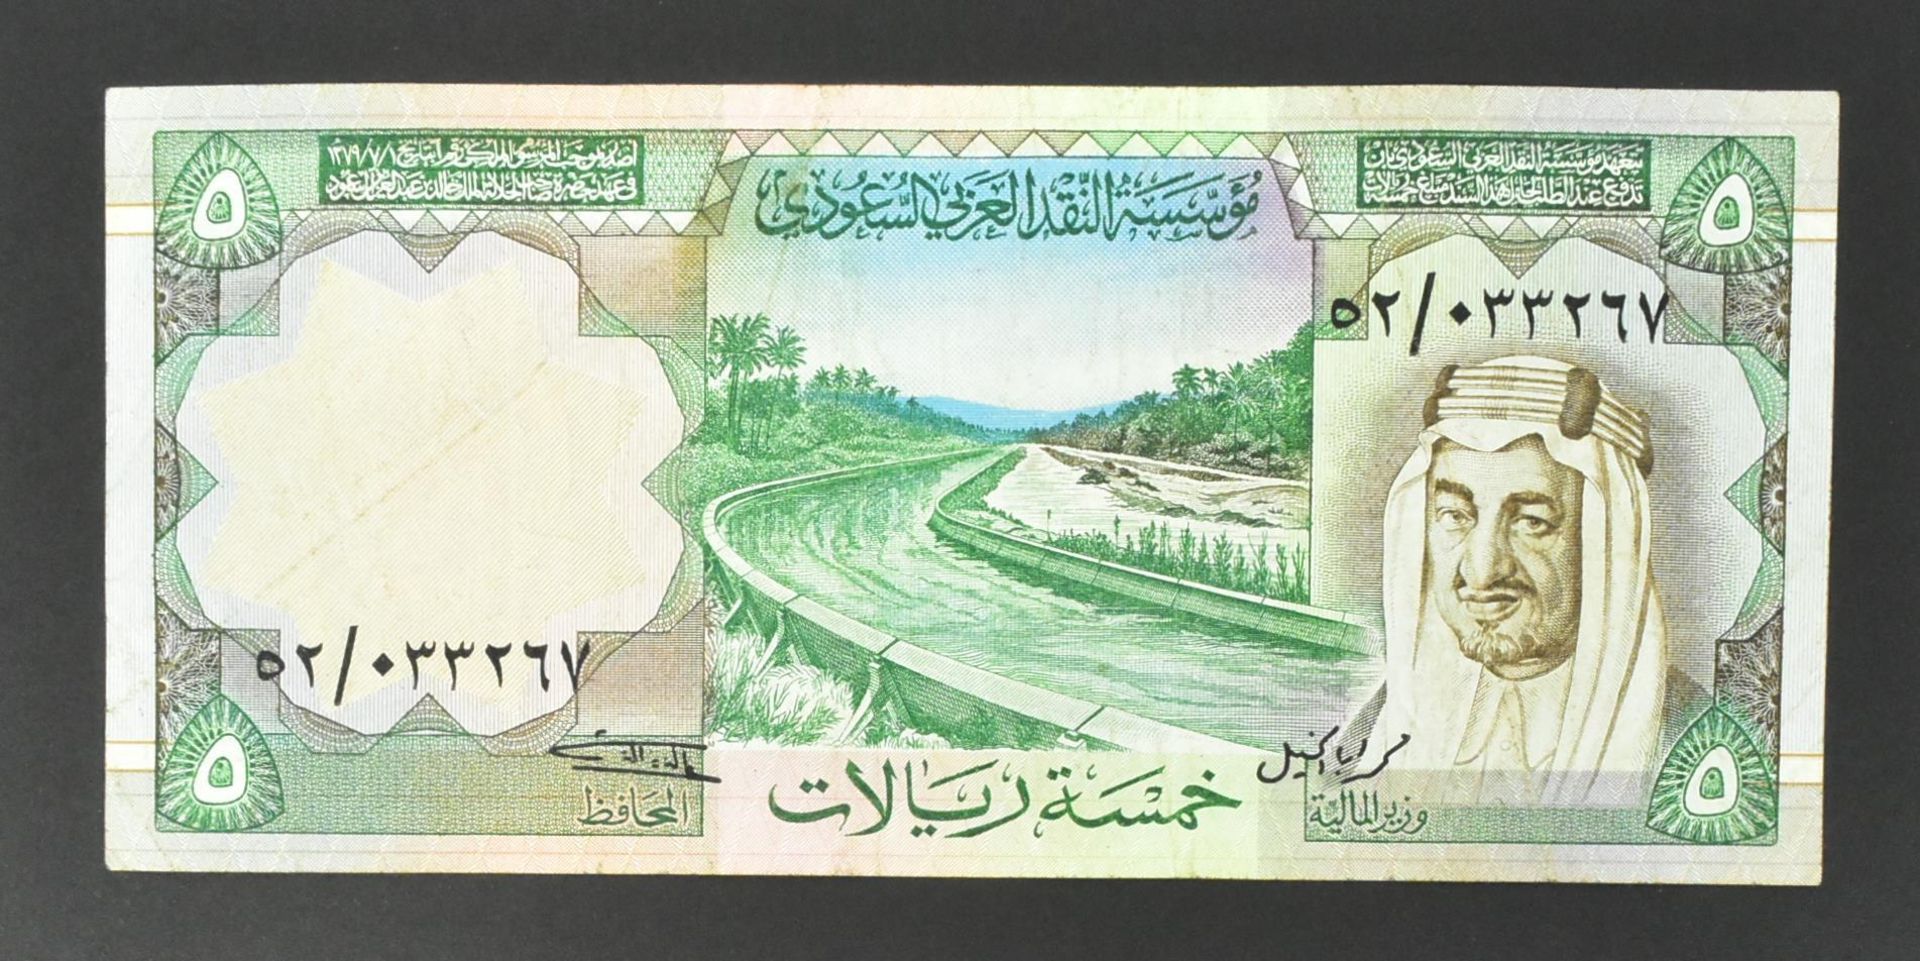 COLLECTION OF INTERNATIONAL UNCIRCULATED BANK NOTES - OMAN - Image 25 of 51